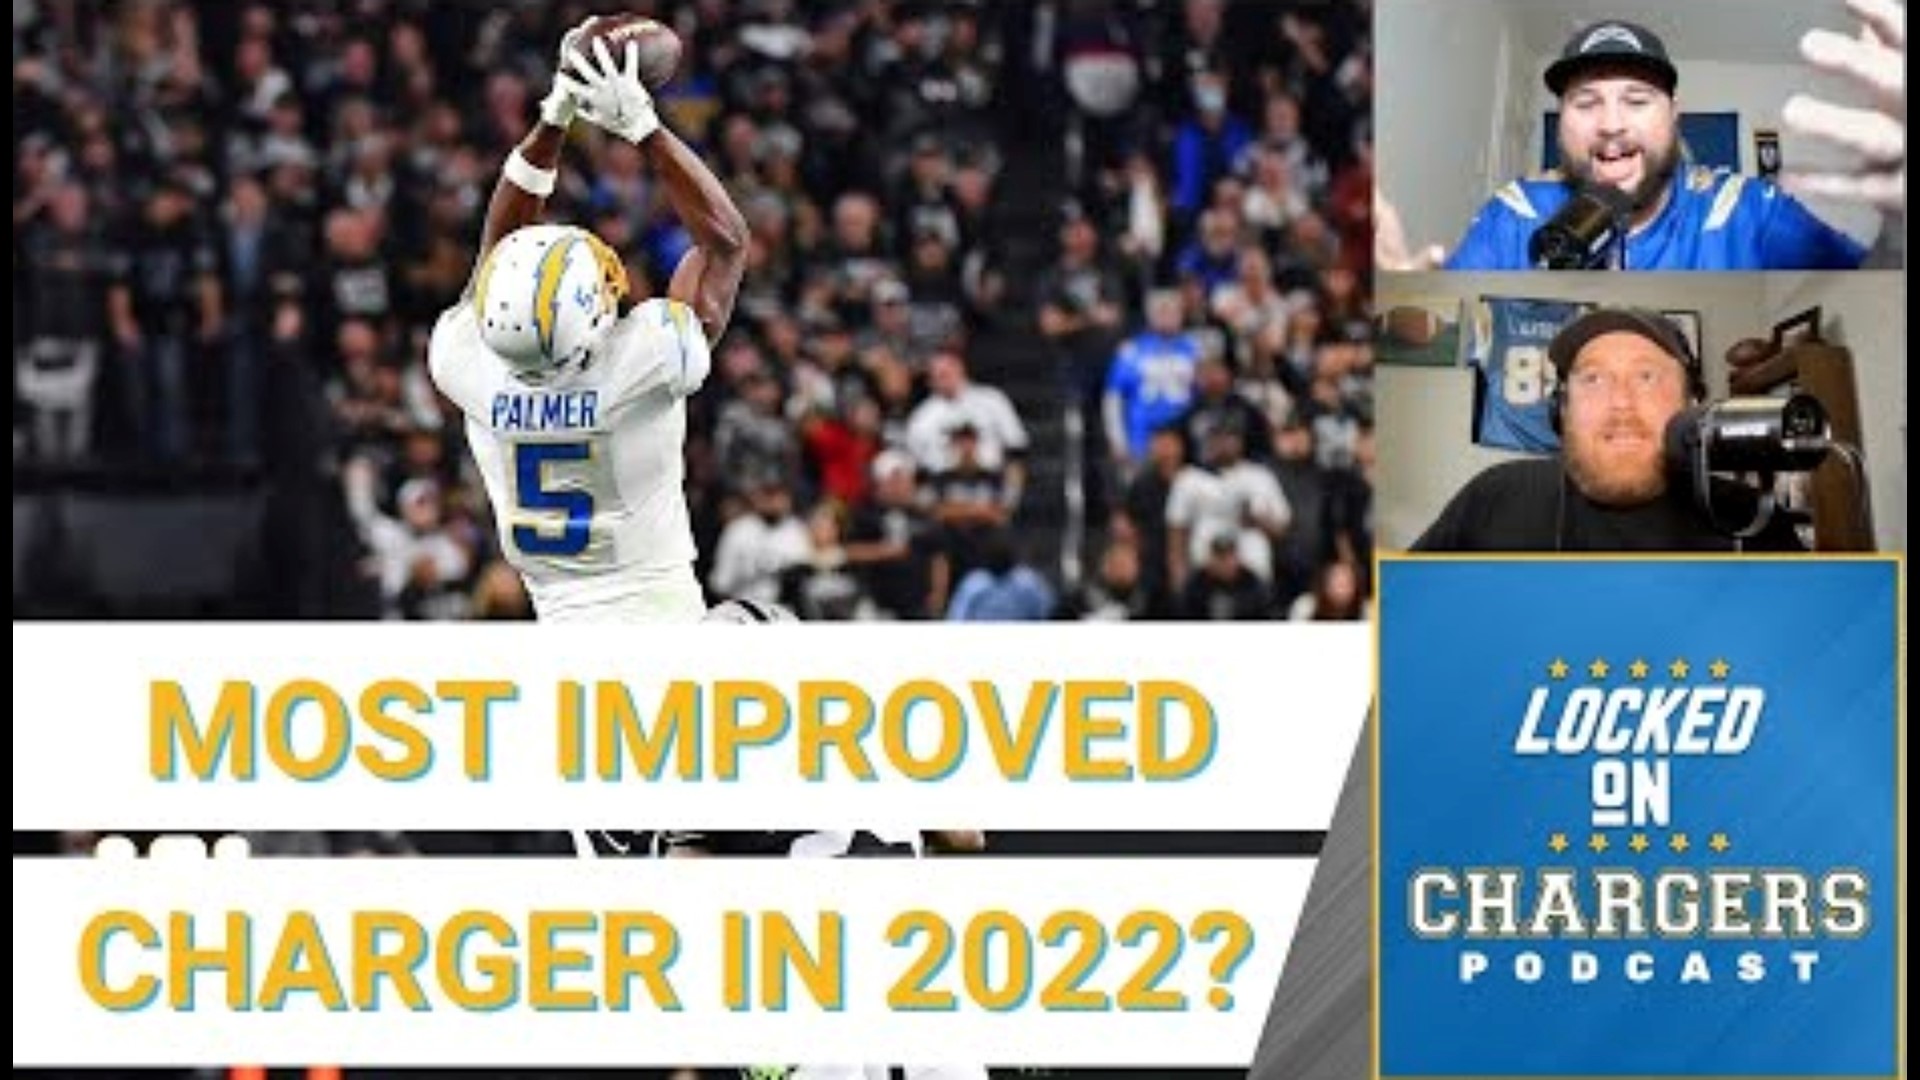 The Chargers added more star power in the offseason, but returning players like Josh Palmer and Asante Samuel Jr. could make big leaps in 2022.